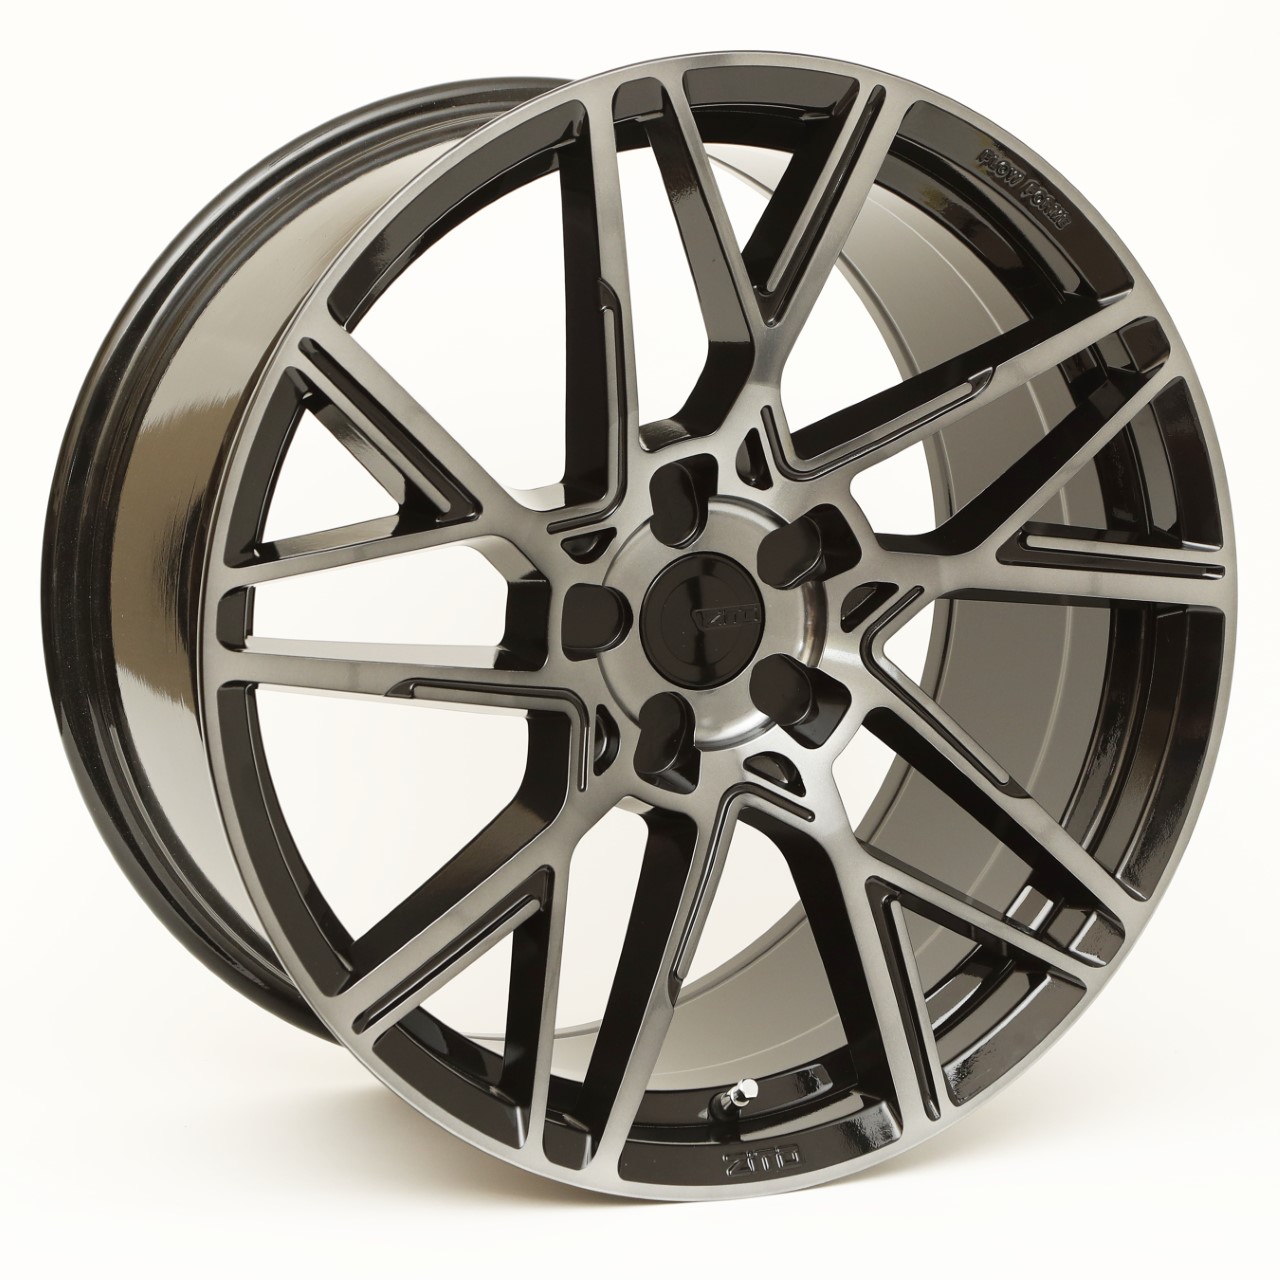 NEW 20" ZITO ZF-X FLOW FORMED ALLOY WHEELS IN GLOSS BLACK WITH POLISHED FACE WITH DEEPER CONCAVE 10" REAR